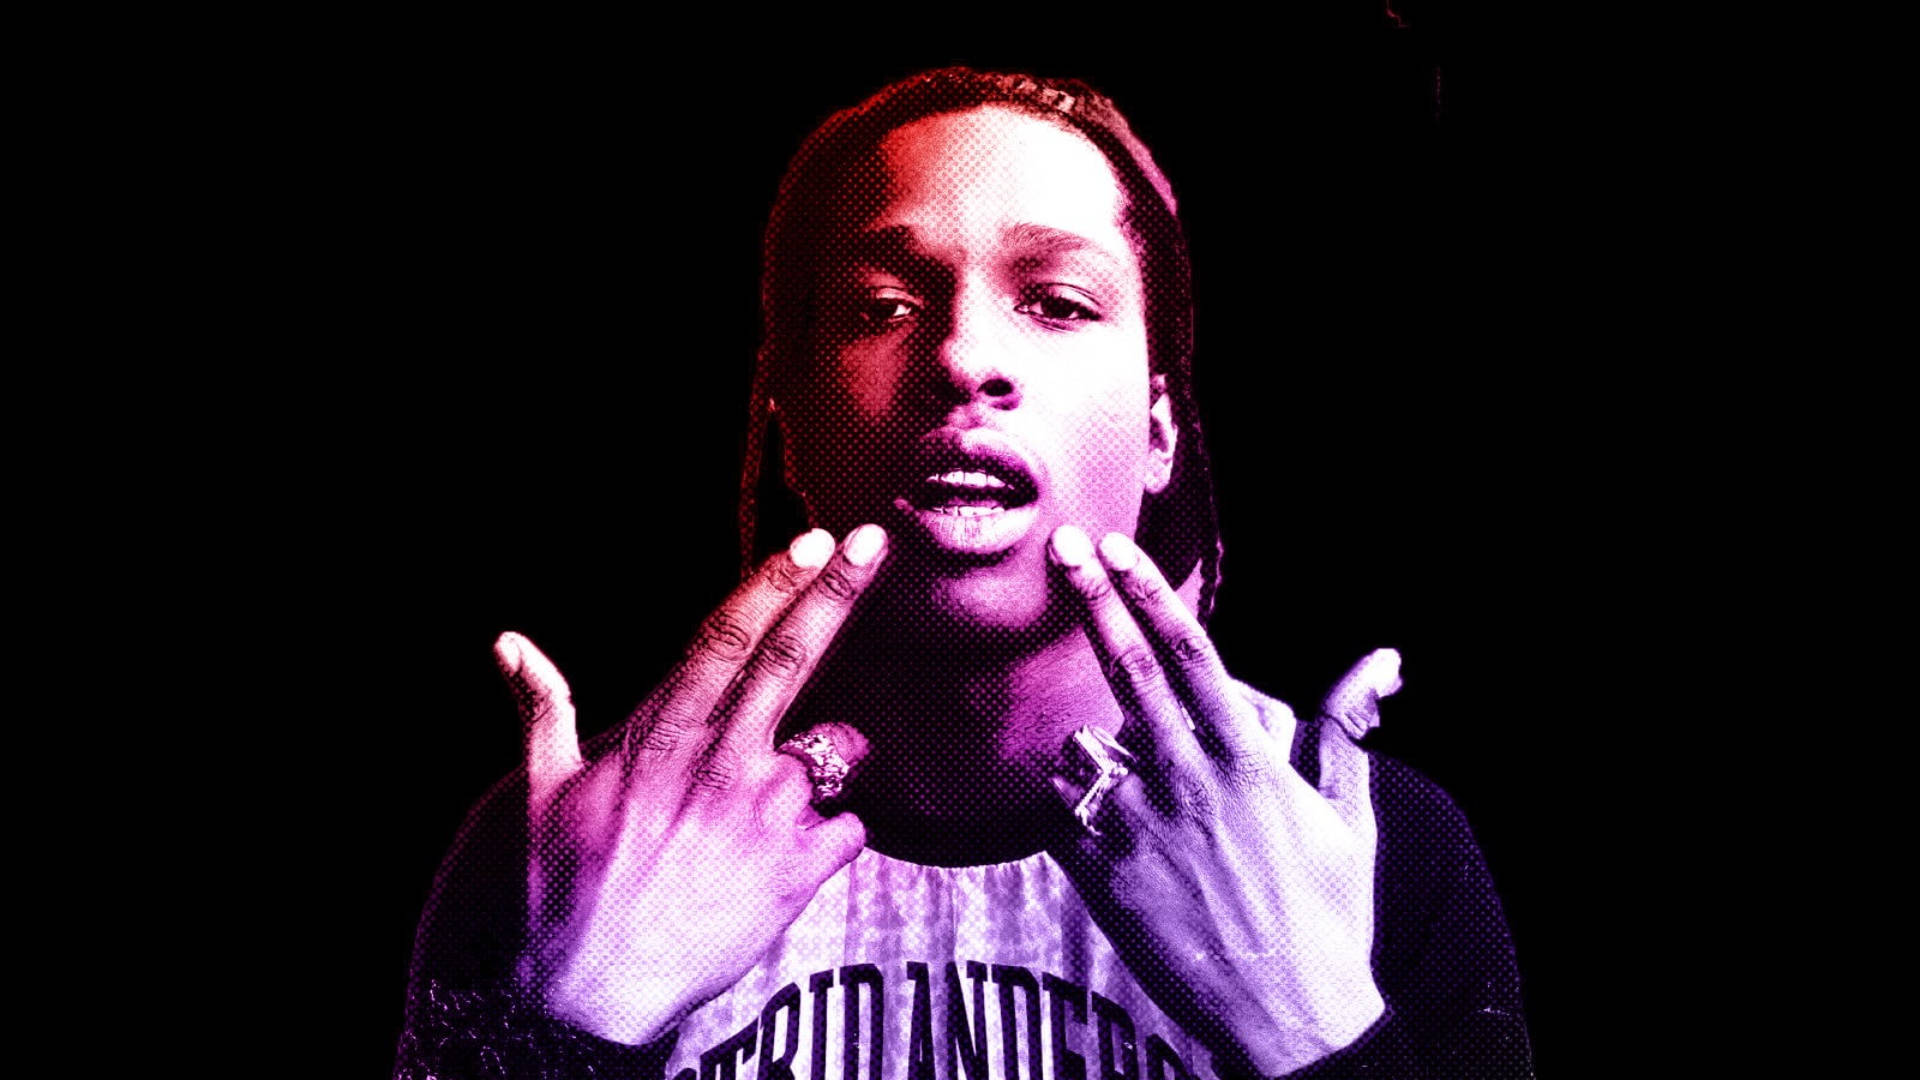 Asap Rocky Gang Signs Background